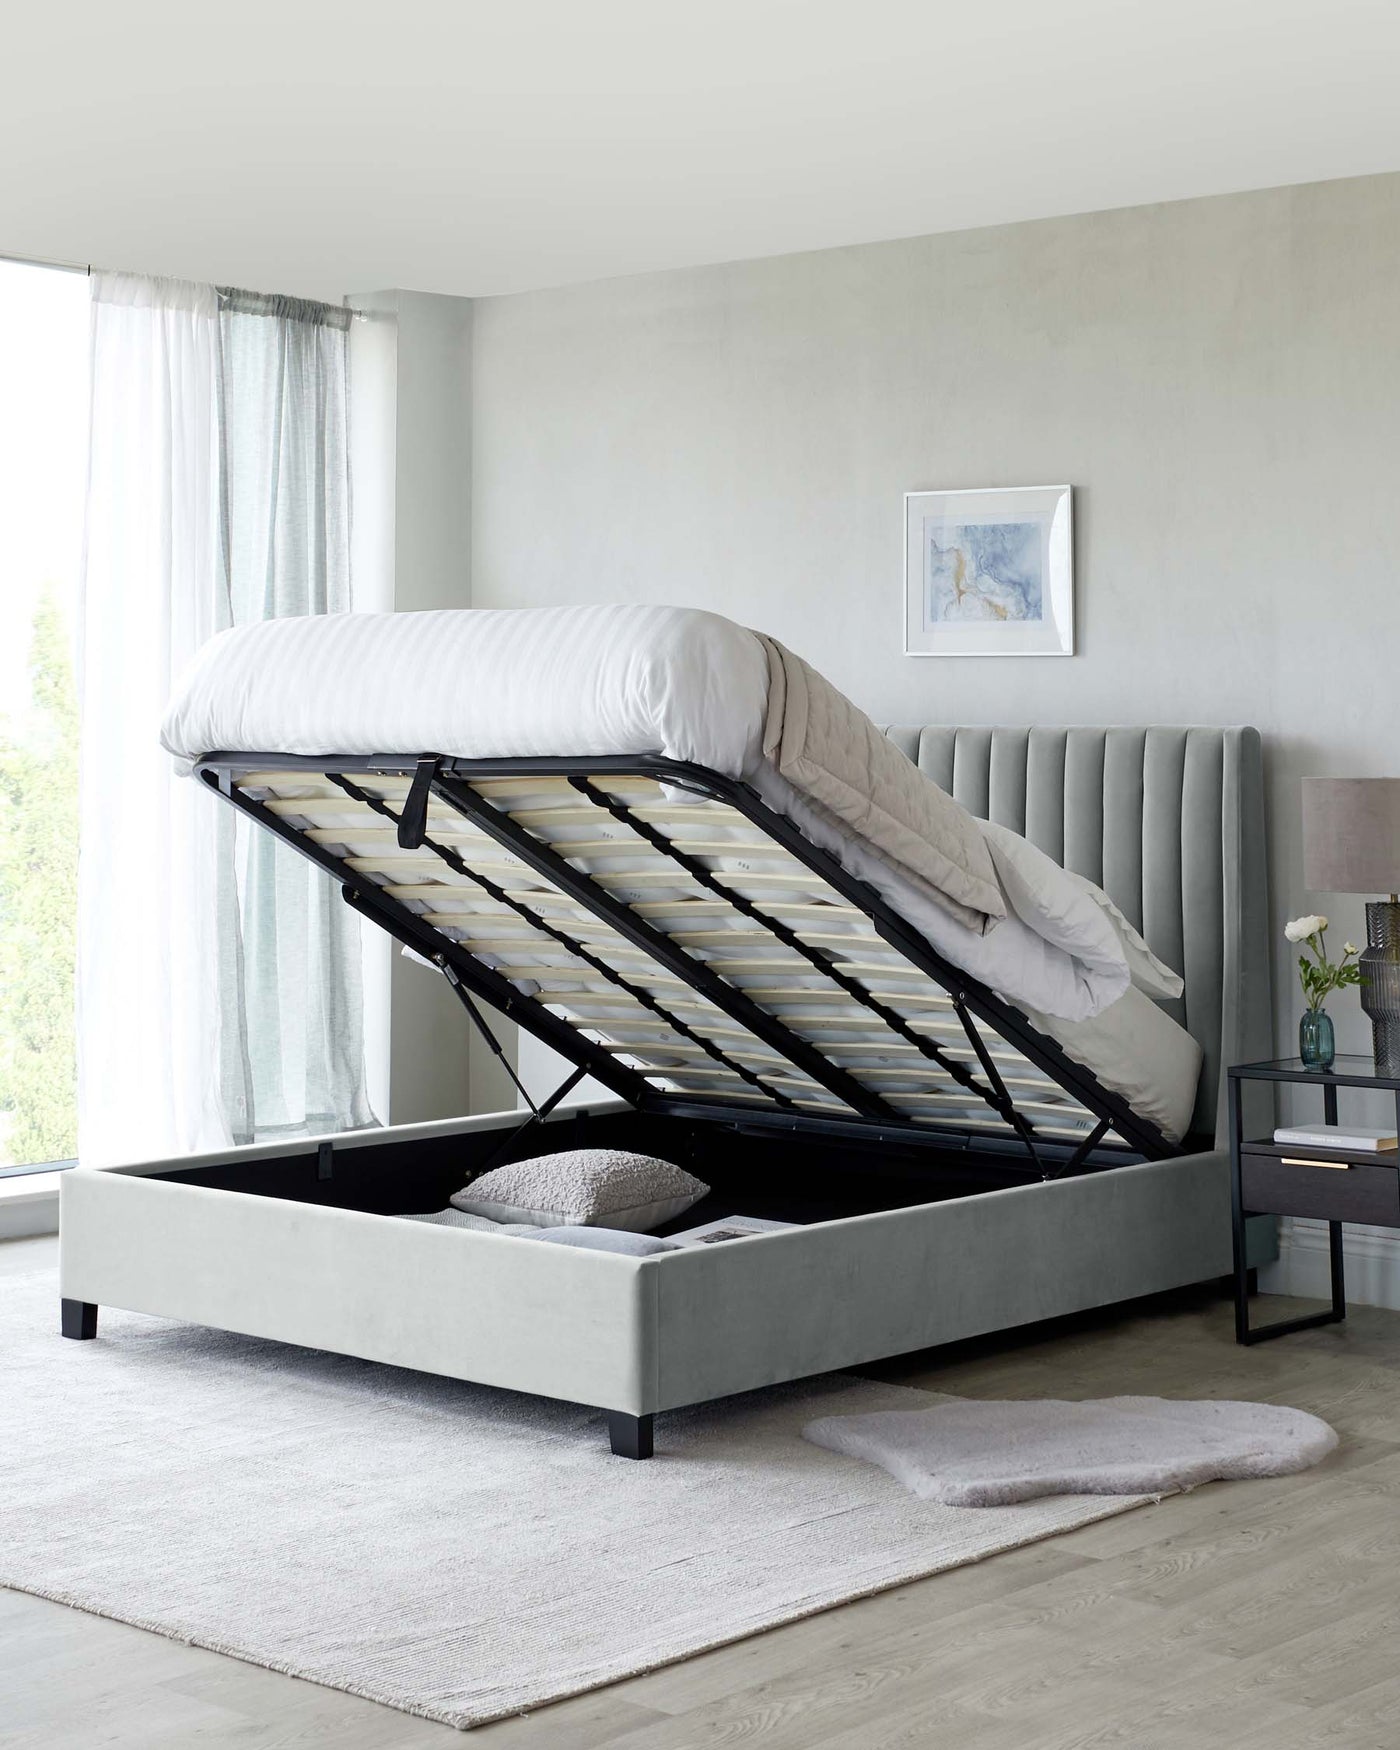 A modern, grey upholstered storage bed with a lifted mattress base revealing a spacious storage area. The bed features a vertical channel-tufted headboard and a sleek, flat upholstered frame resting on short black legs. It is complemented by a grey textured rug and a small, stylish bedside table with a dark finish and metallic frame.